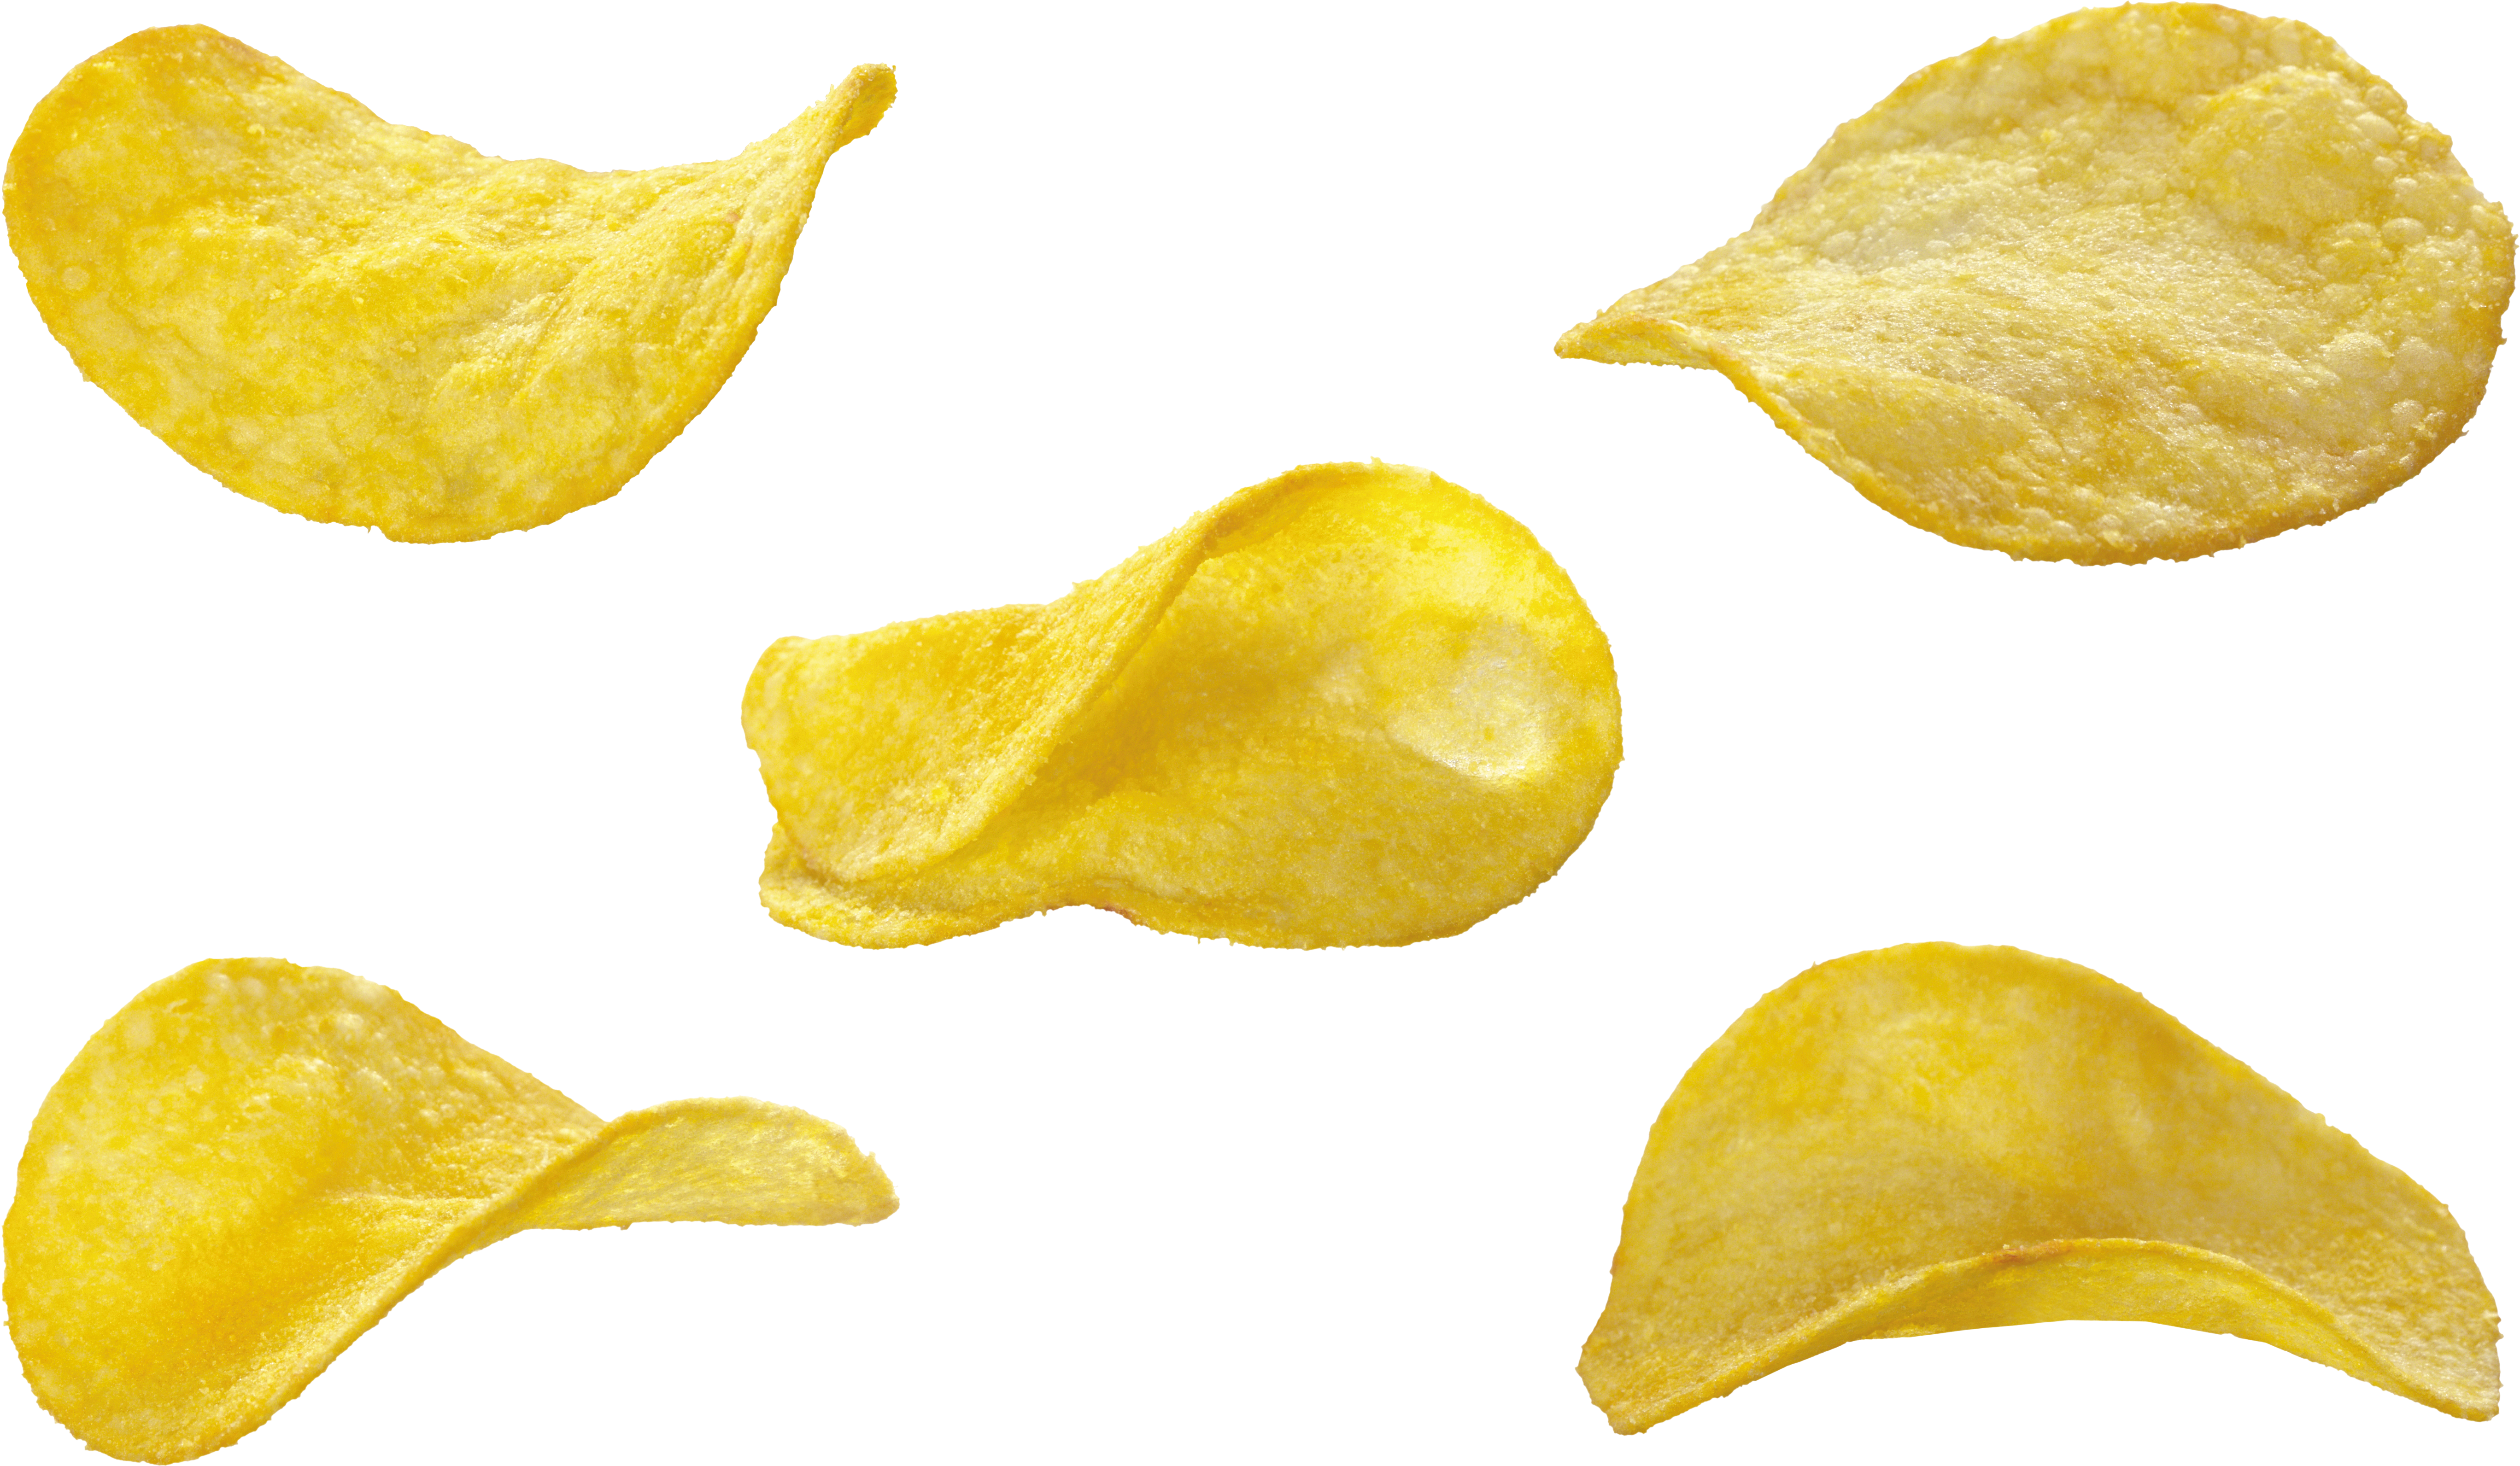 Potato chips PNG images free download.